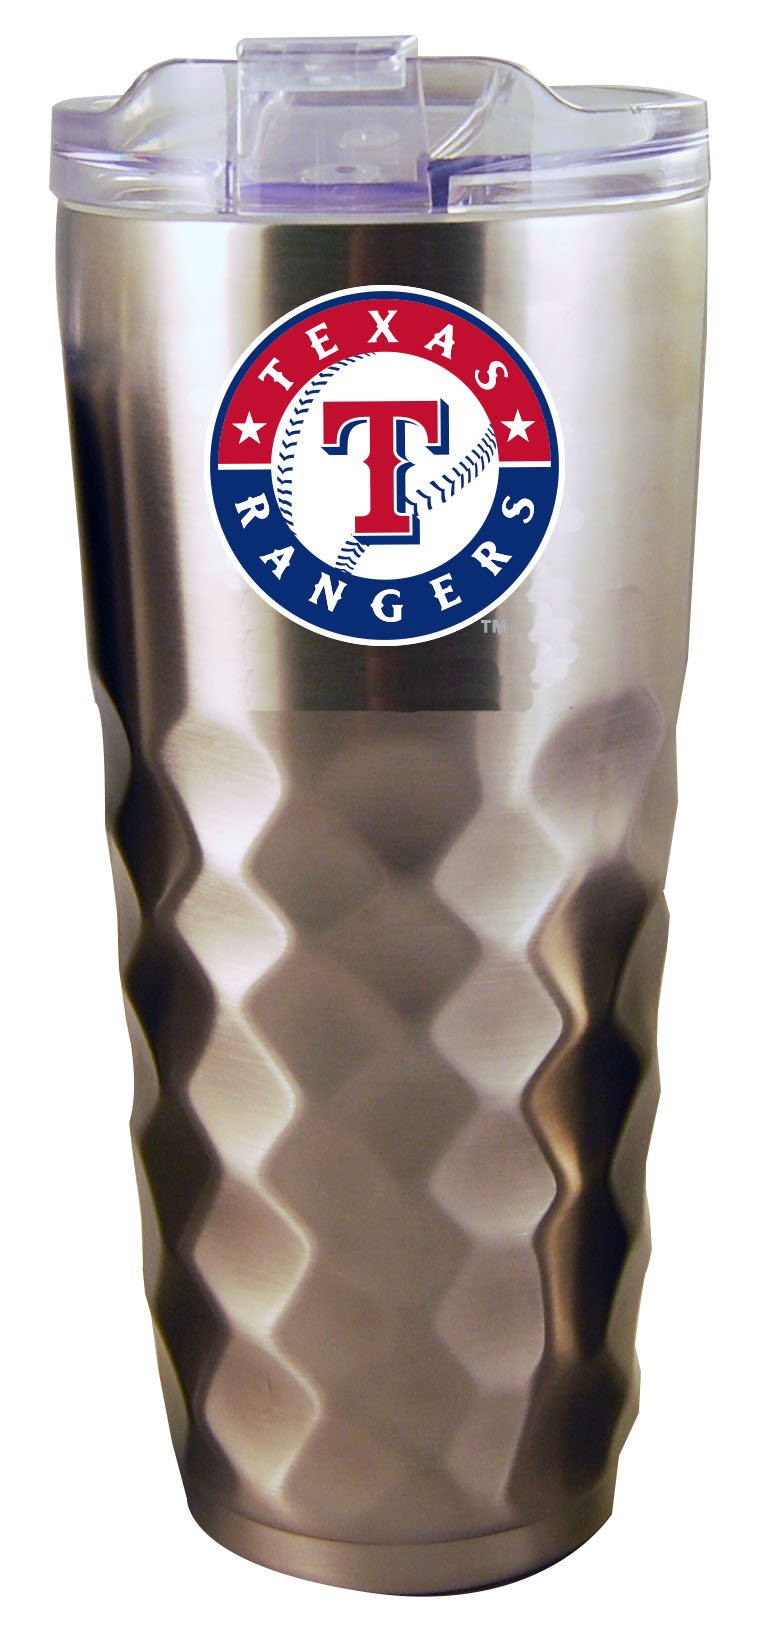 32OZ SS DIAMD TMBLR RANGERS
CurrentProduct, Drinkware_category_All, MLB, Texas Rangers, TRA
The Memory Company